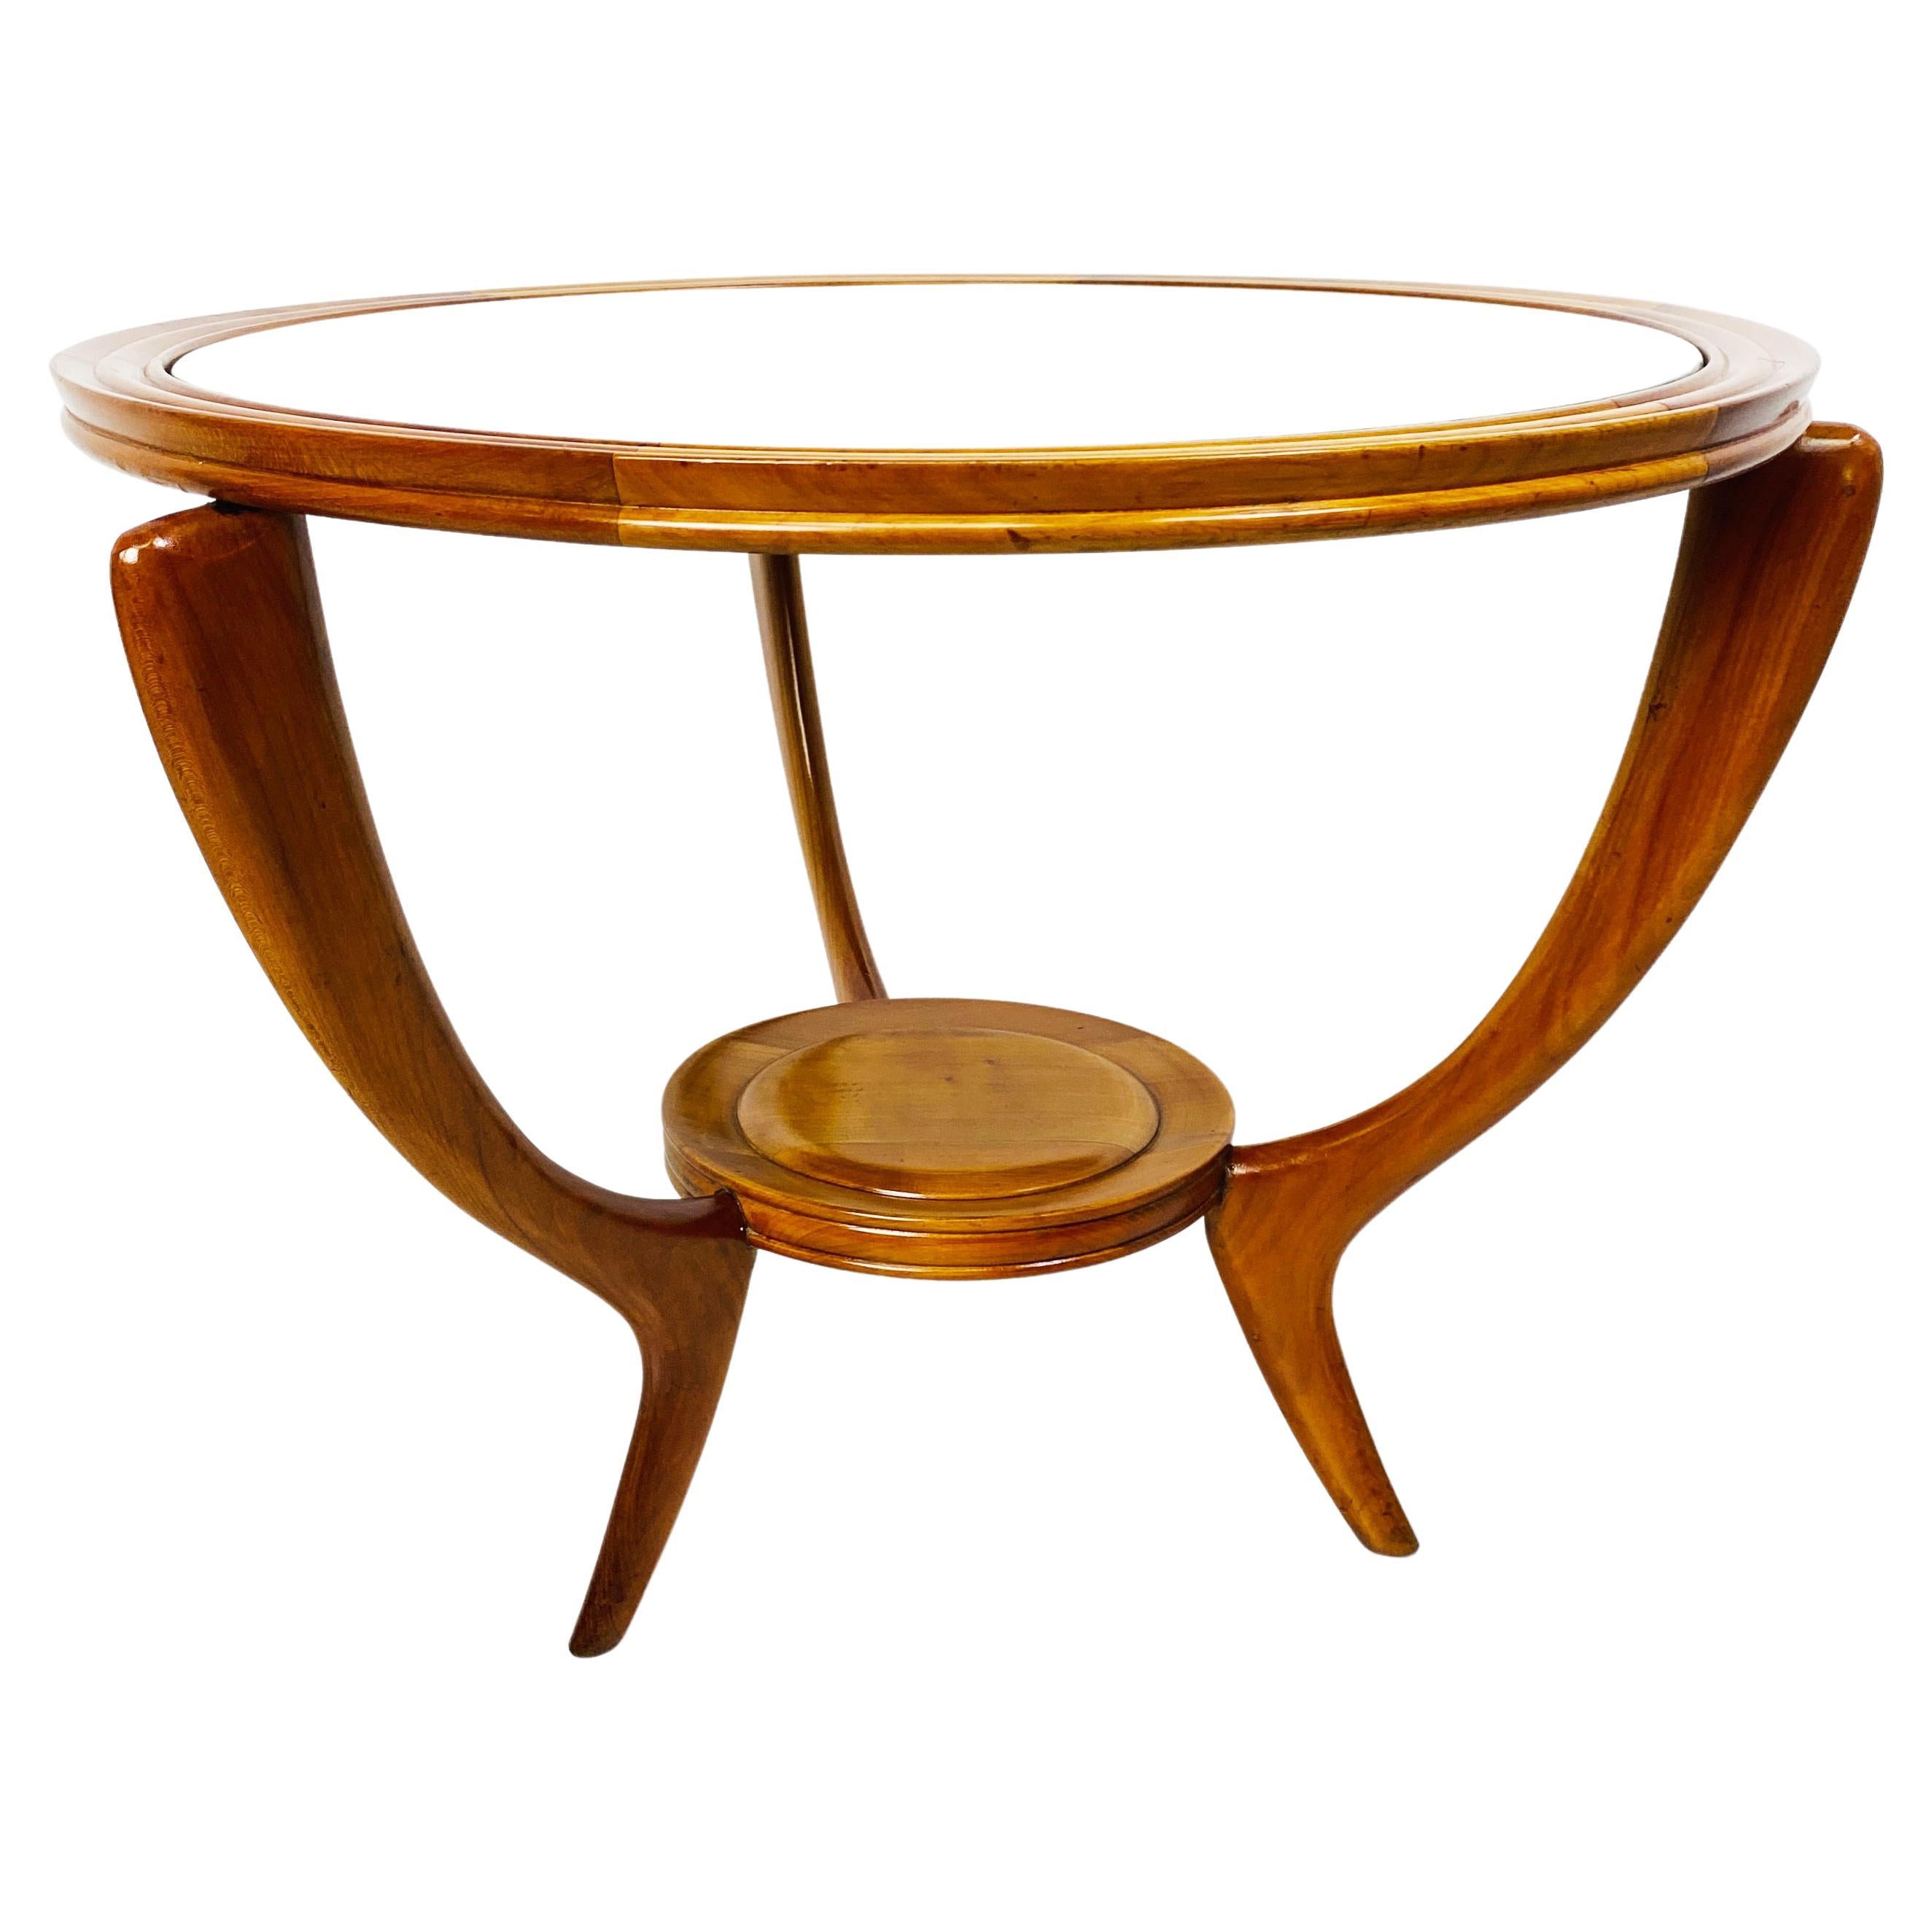 Italian Mid-Century Wood Round Table with Mirror, 1950s For Sale